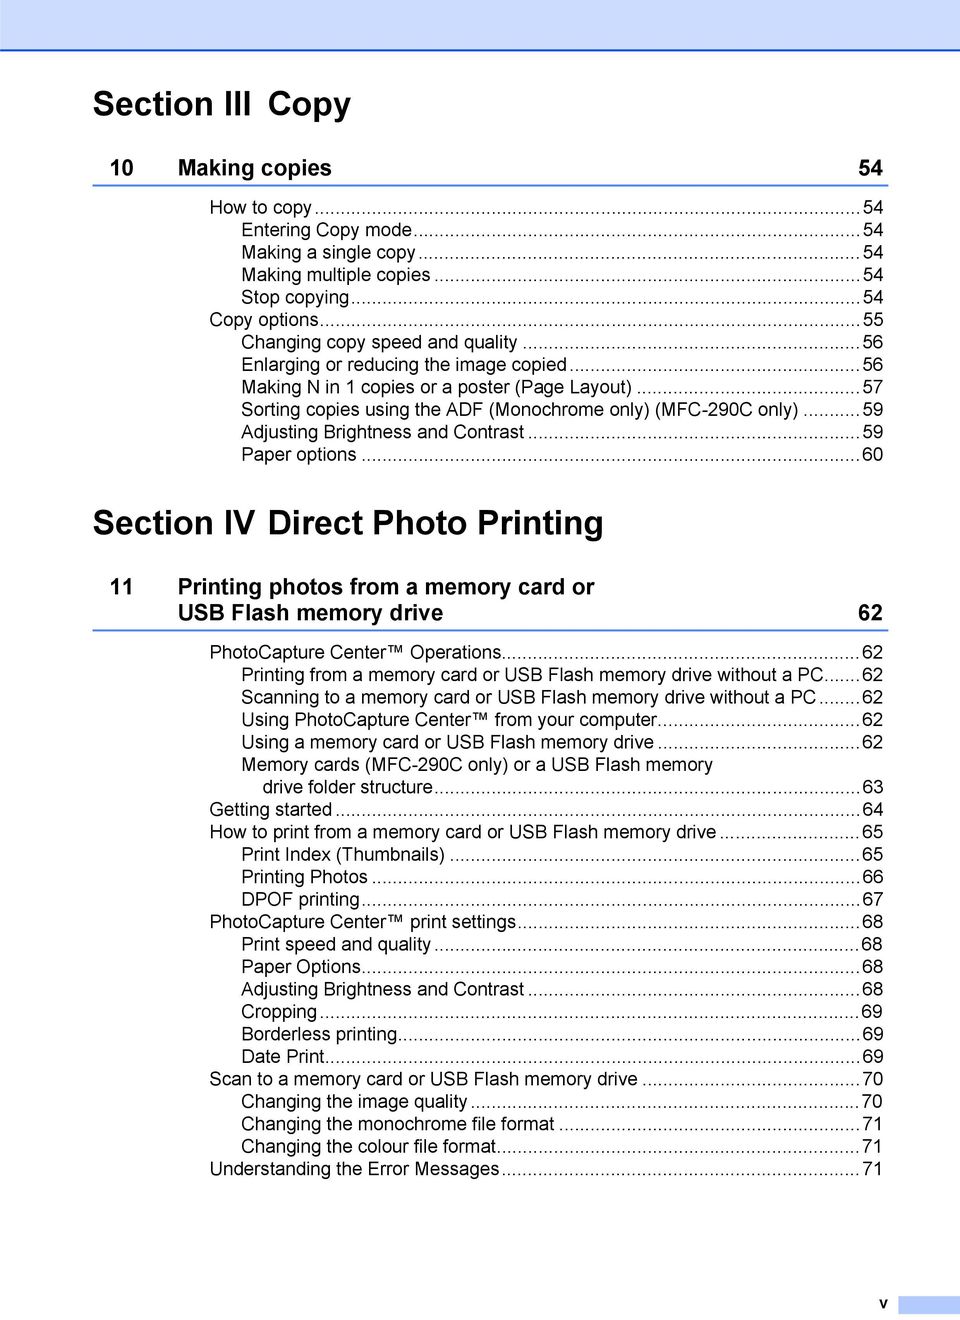 ..59 Adjusting Brightness and Contrast...59 Paper options...60 Section IV Direct Photo Printing 11 Printing photos from a memory card or USB Flash memory drive 62 PhotoCapture Center Operations.